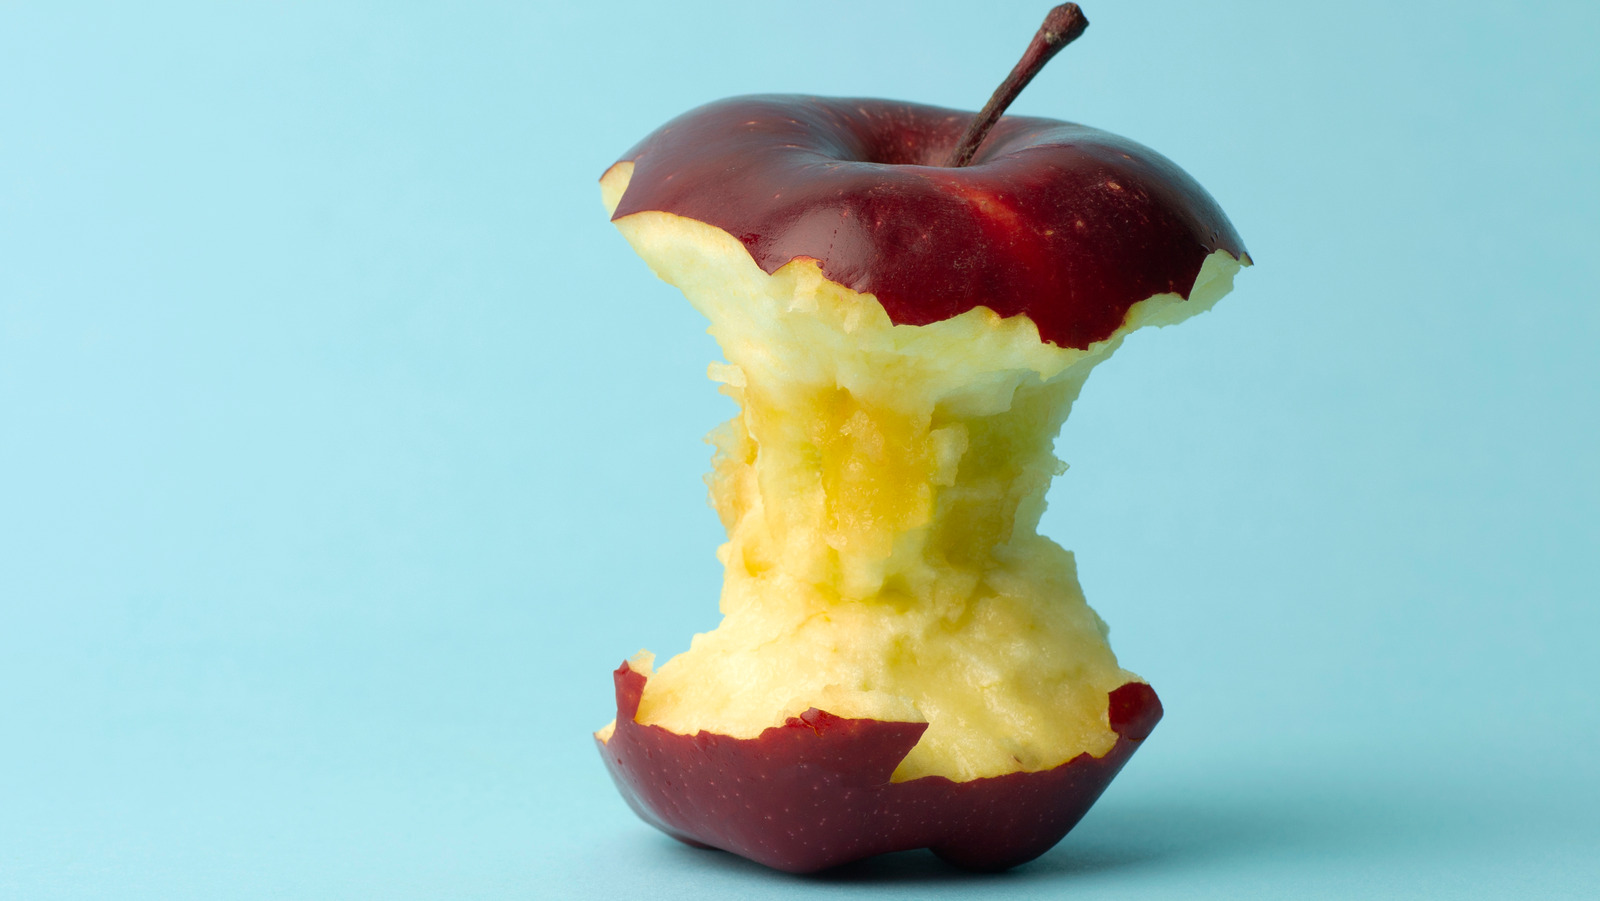 https://www.healthdigest.com/img/gallery/what-happens-to-your-body-if-you-eat-an-apple-core/l-intro-1635778290.jpg